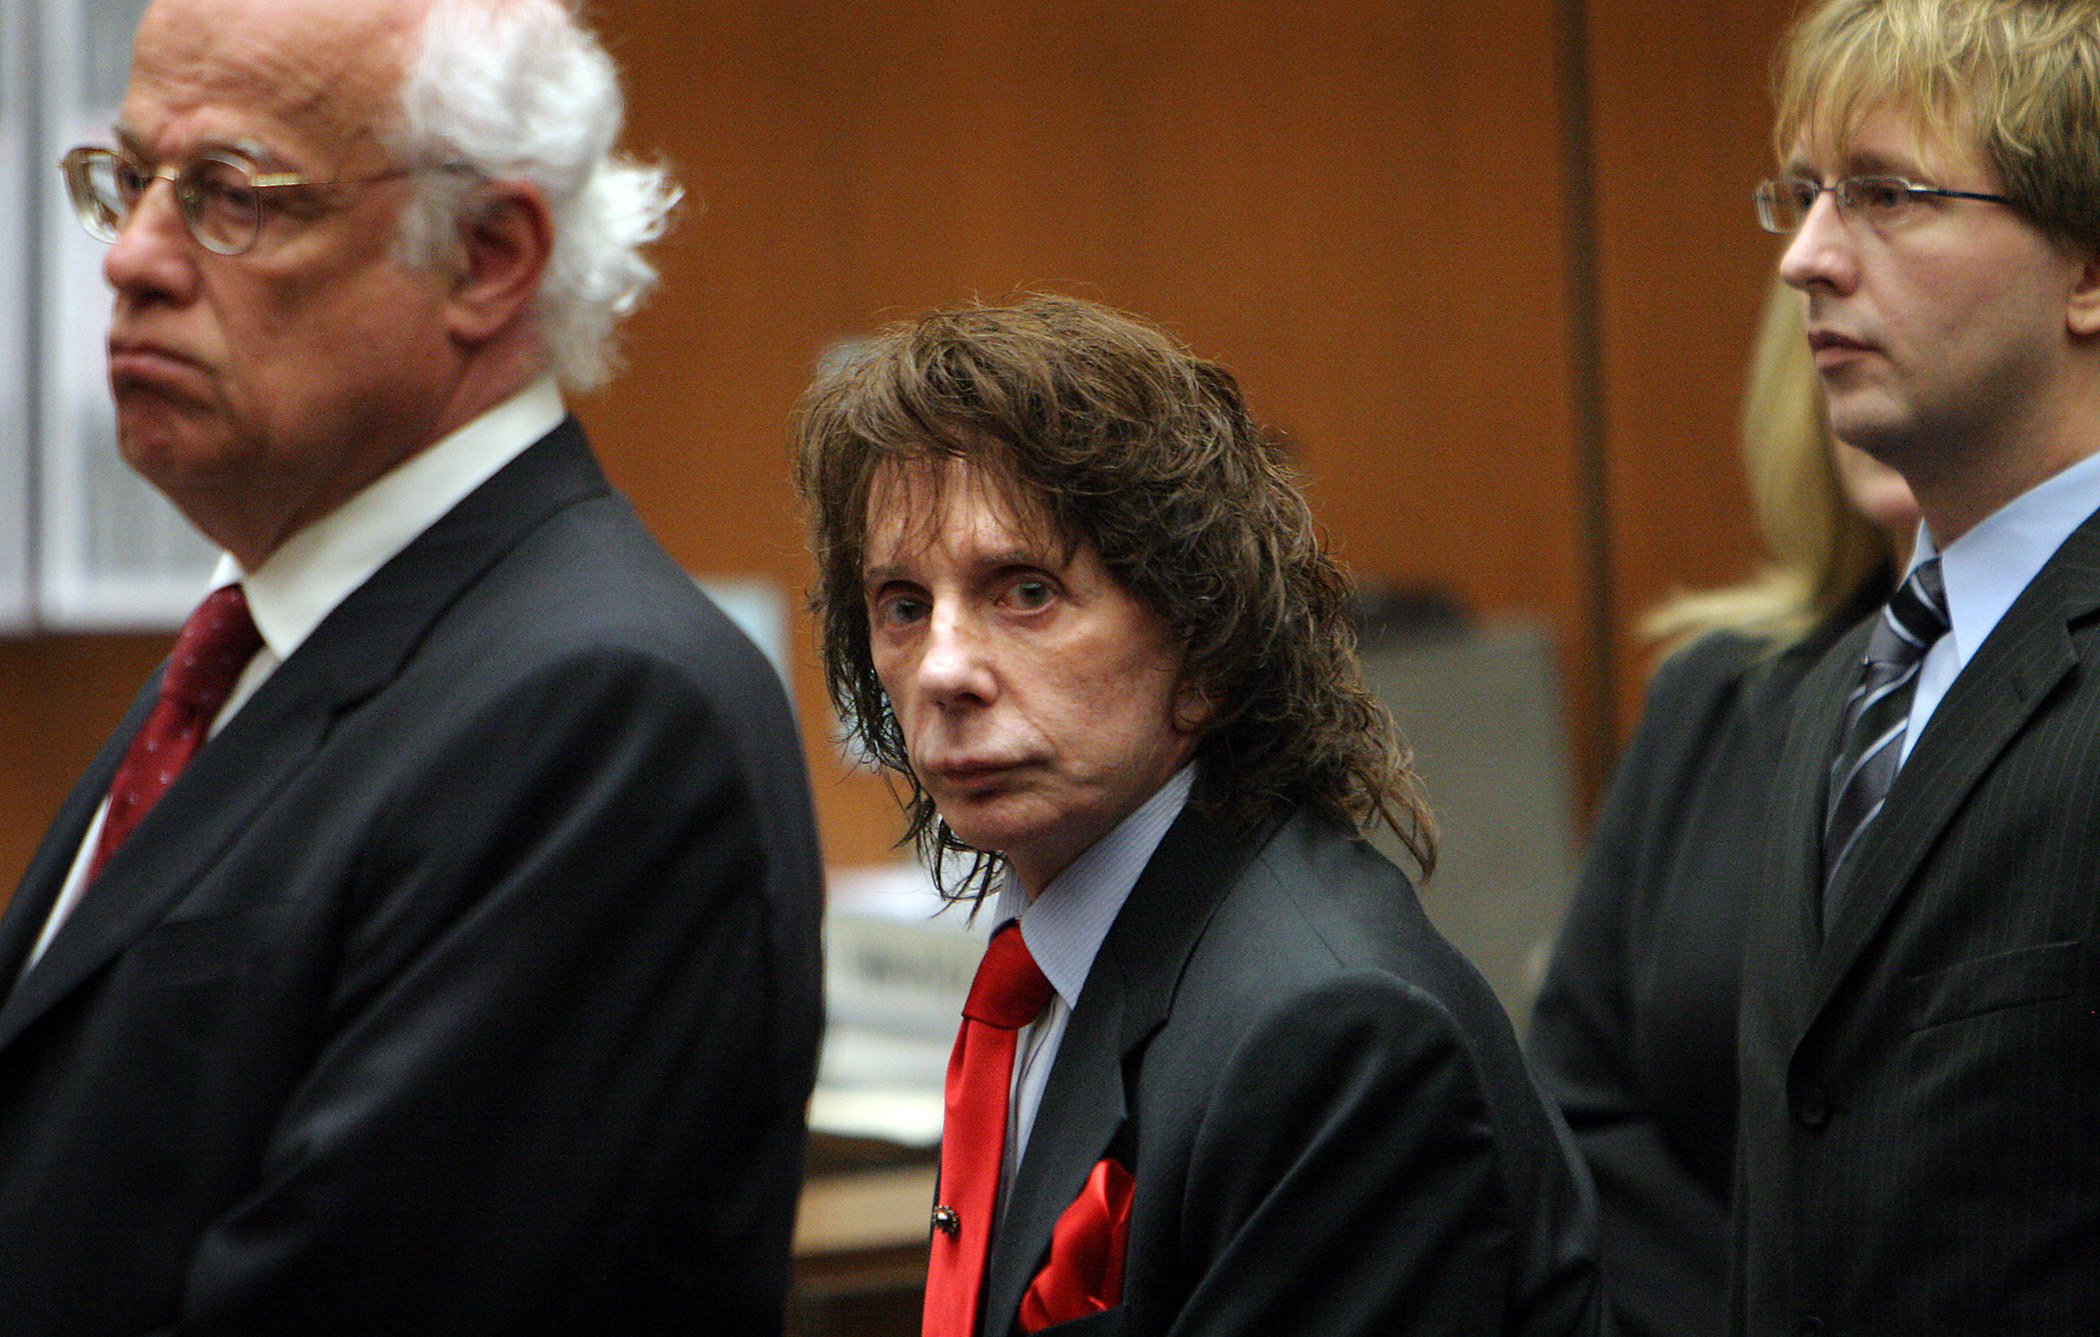 Phil Spector in between two lawyers in court looks at the camera